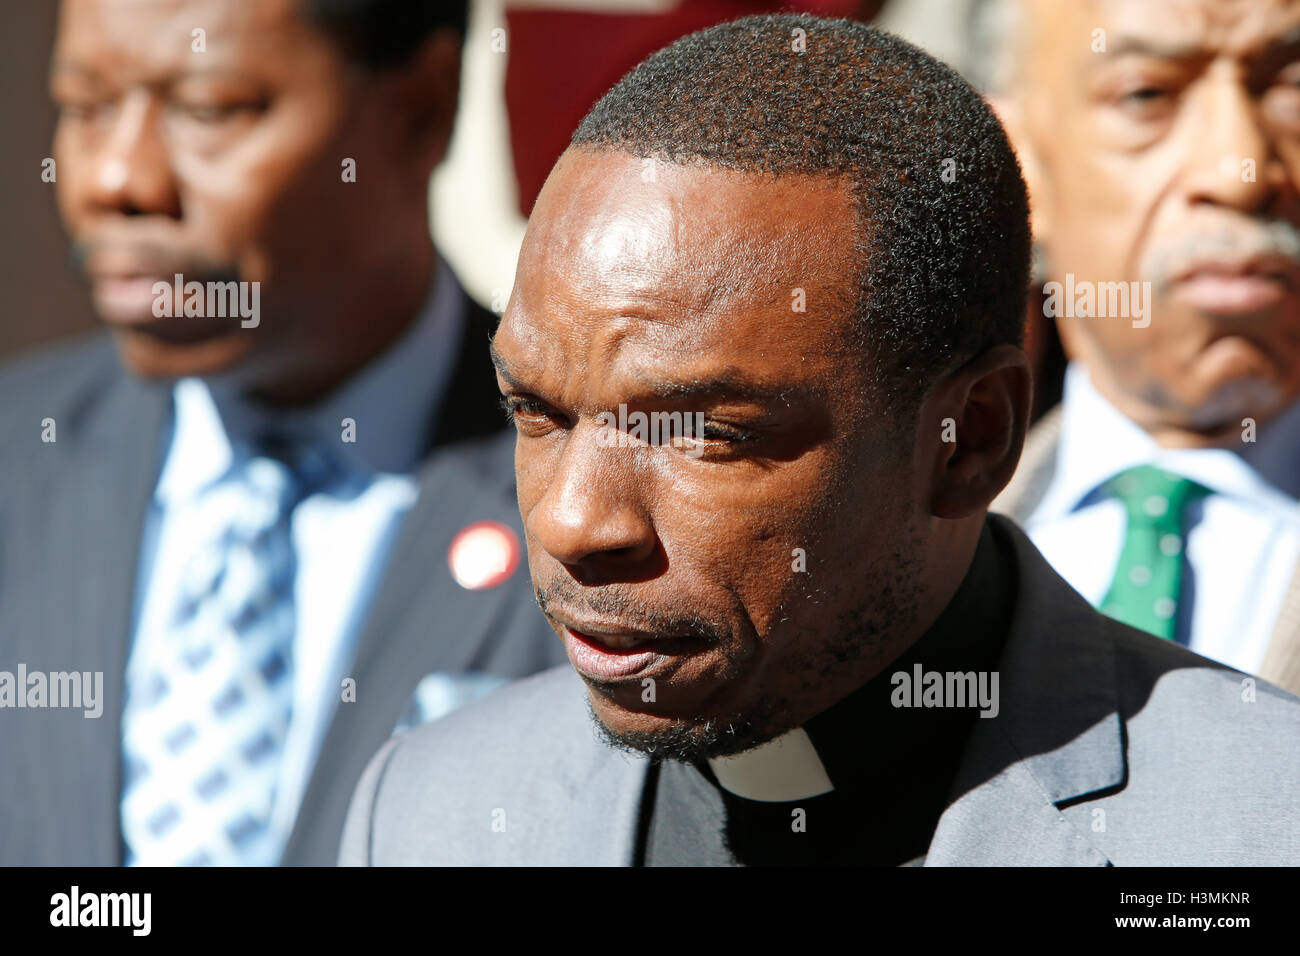 New York City, United States. 10th Oct, 2016. Rev Emmanuel Asse, NAN district manager for Long Island, speaks to the press. Rev Al Sharpton gathered with members of the NYC City Council in Midtown Manhattan to announce support for Haitians displaced by Hurricane Matthew, & to eulogize late Kings County district attorney Ken Thompson who passed away unexpectedly from cancer the day before. Credit:  Andy Katz/Pacific Press/Alamy Live News Stock Photo